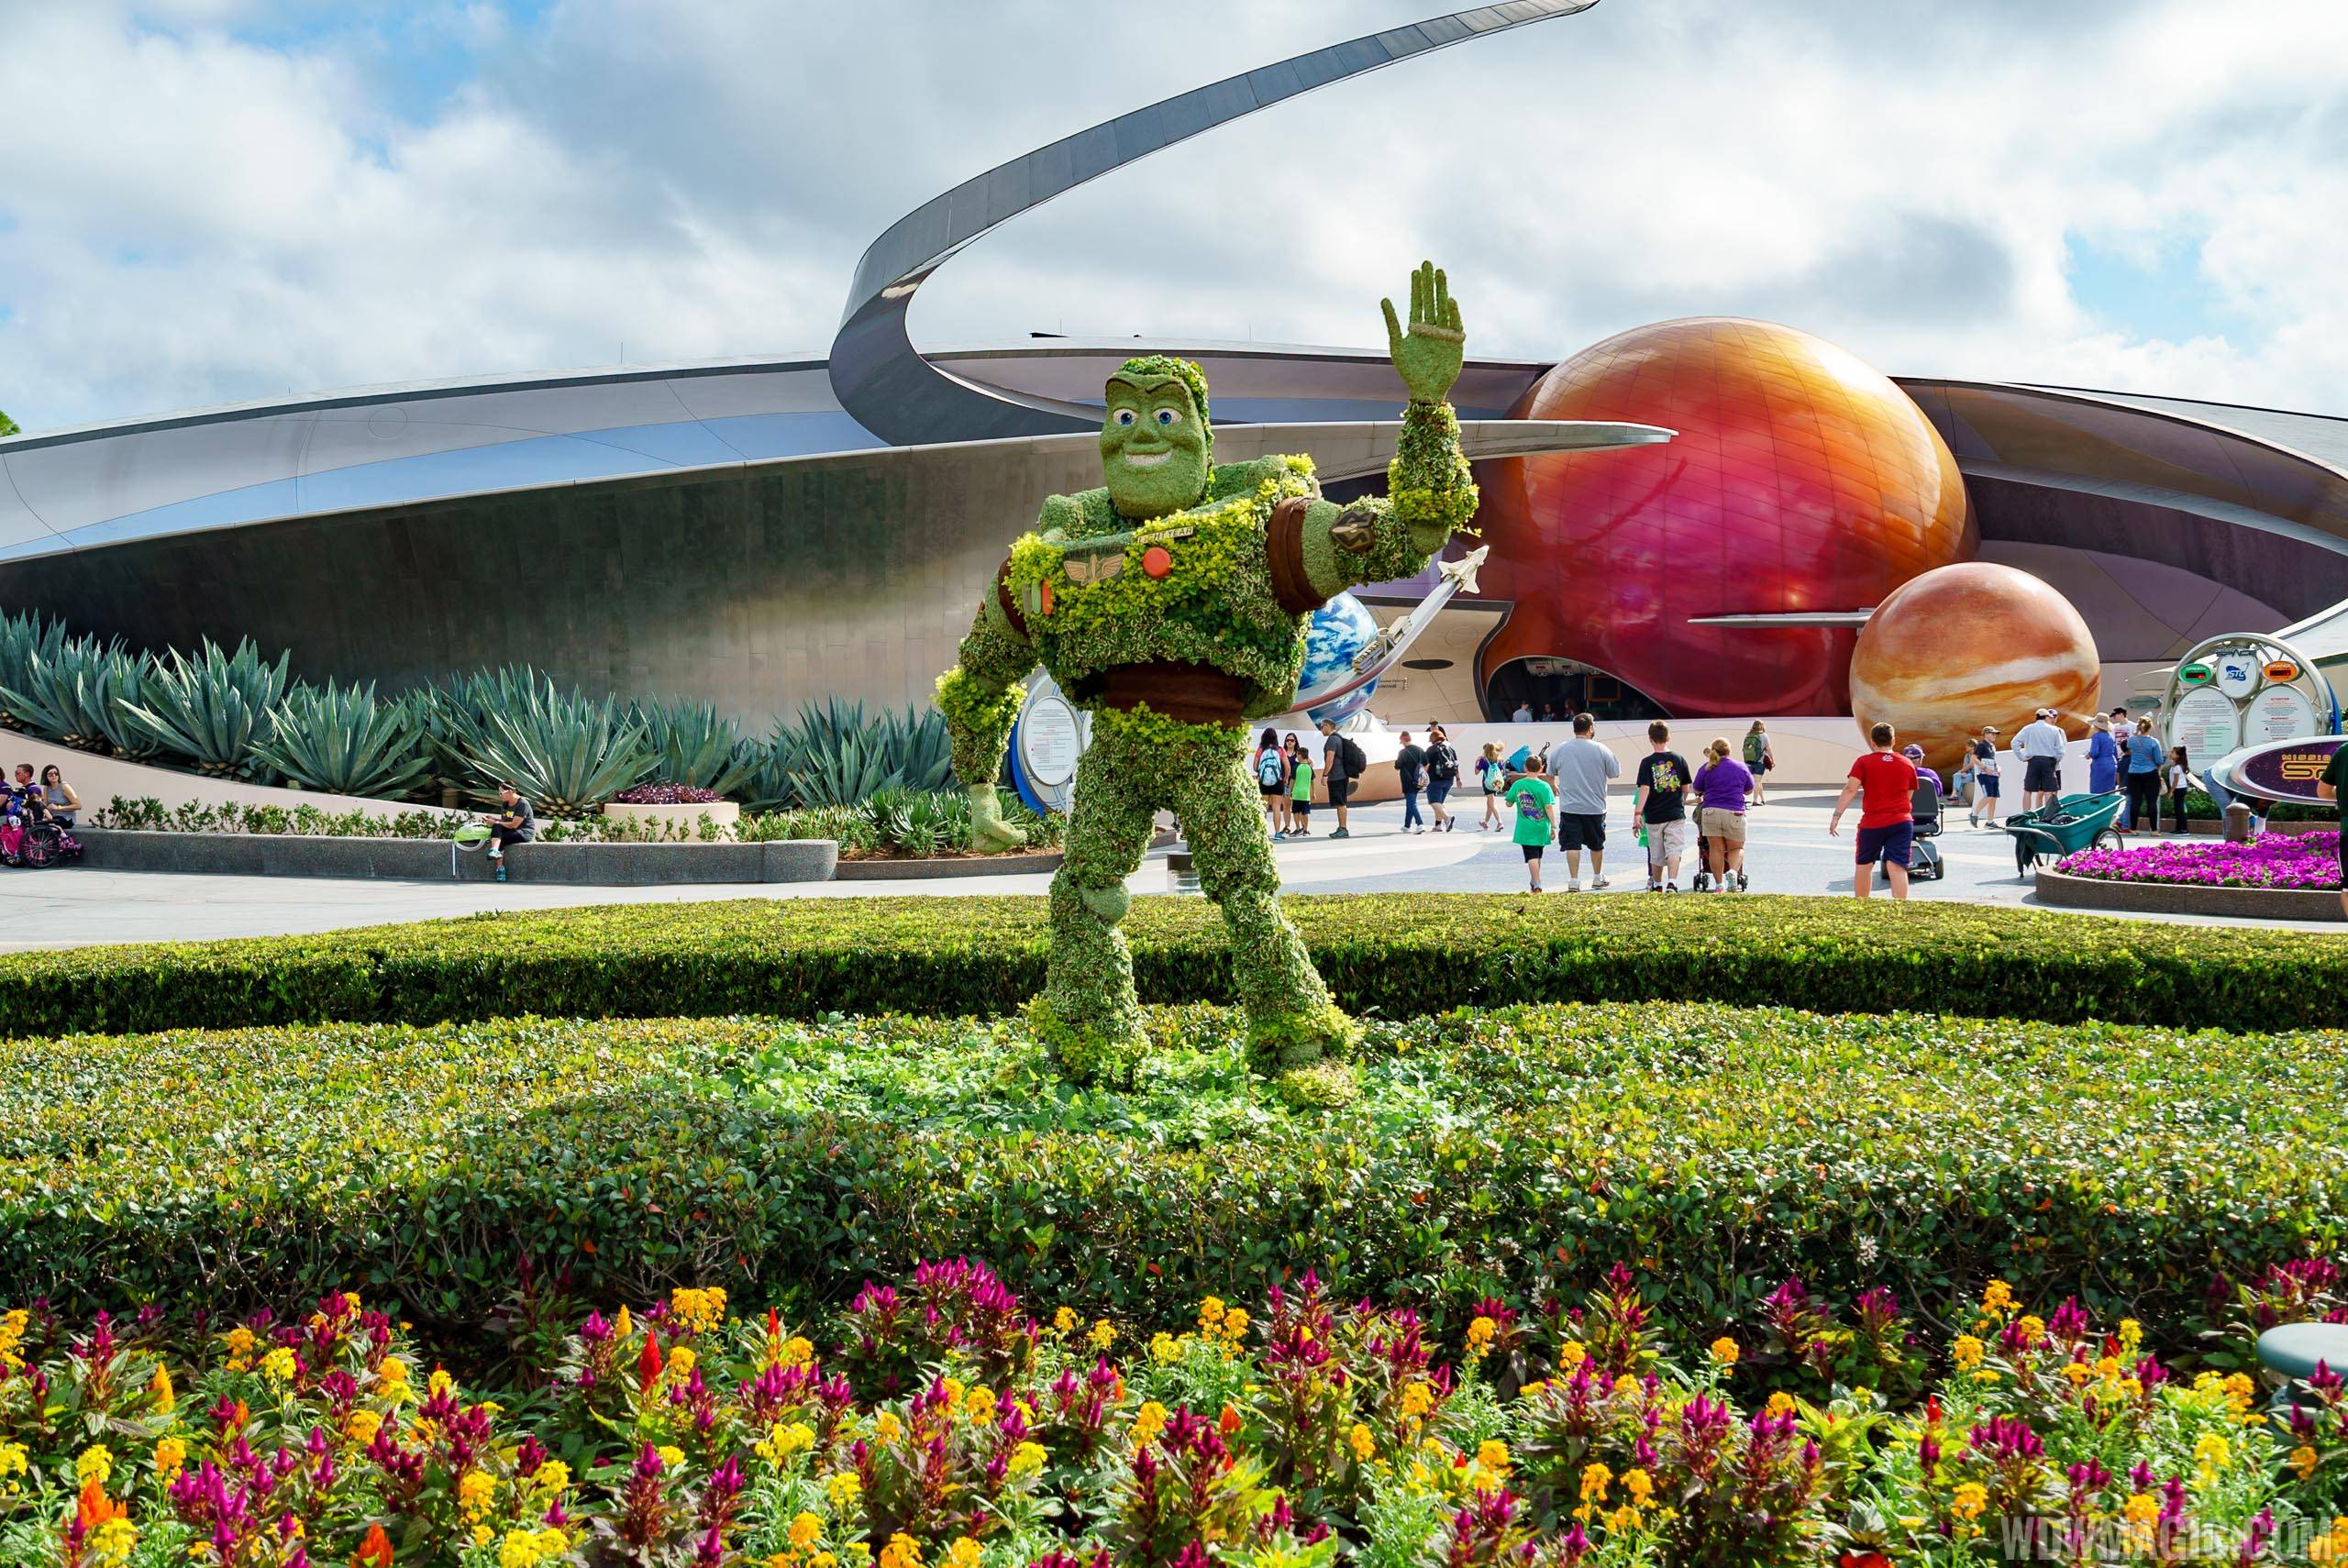 2017 Flower and Garden Festival - Buzz Lightyear topiary near Mission Space